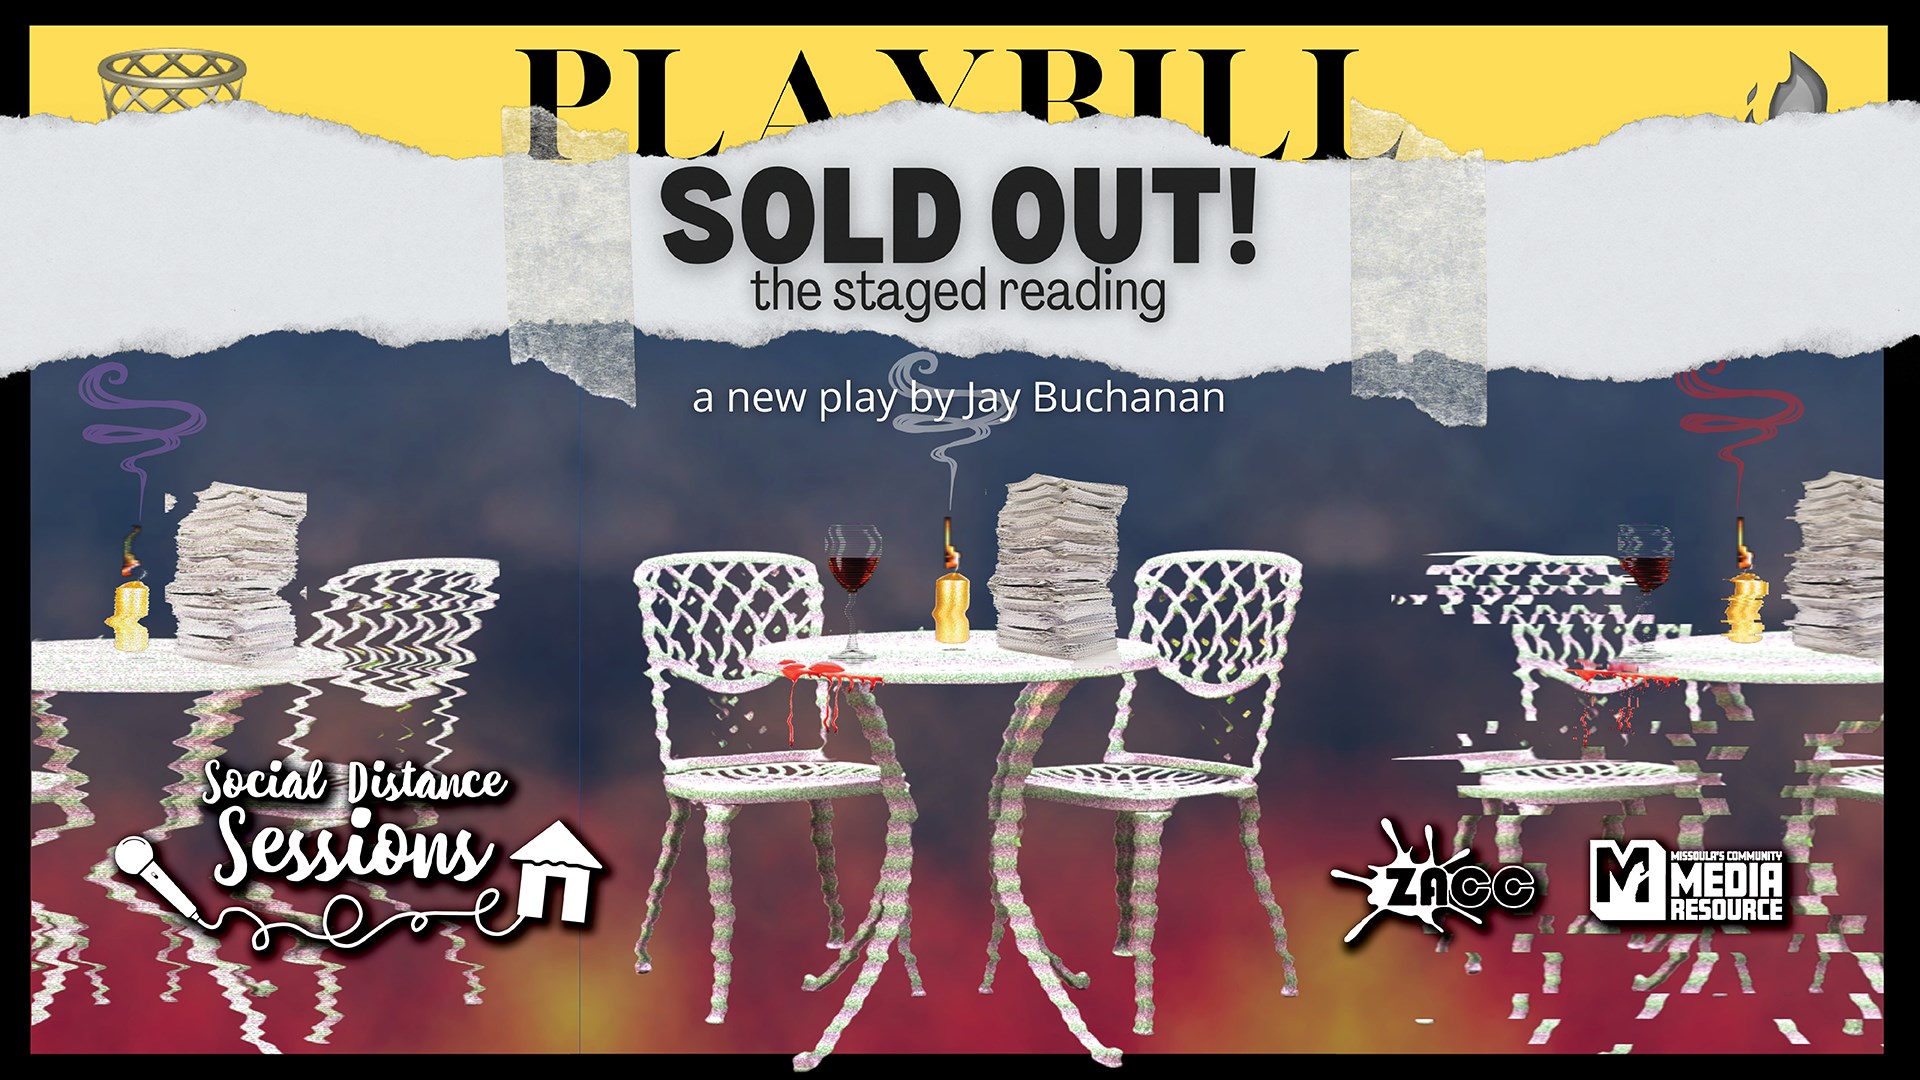 Social Distance Sessions: SOLD OUT! The Staged Reading, a new play by Jay Buchanan